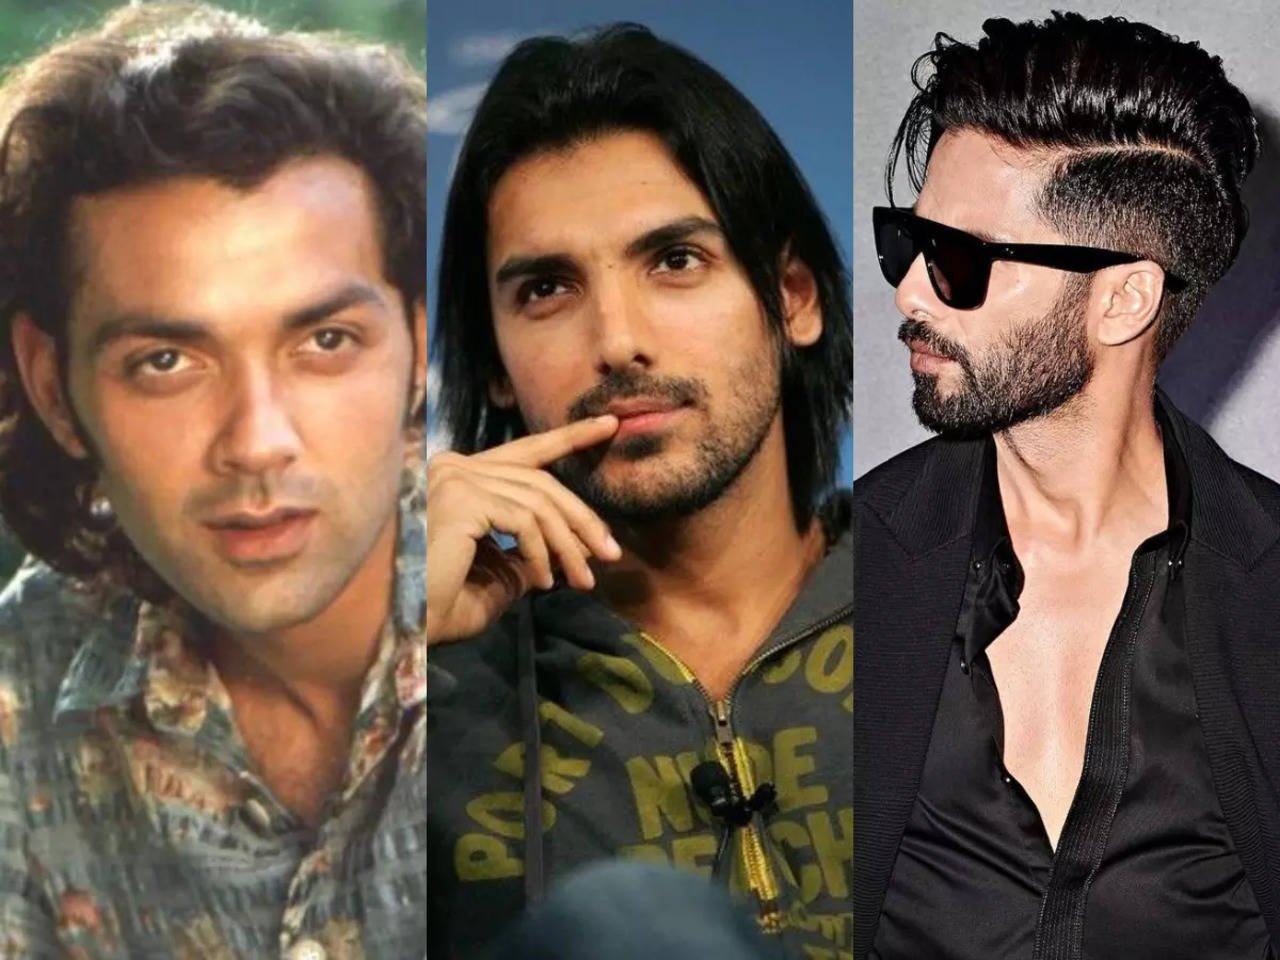 8 Men's Hairstyles from Bollywood Movies